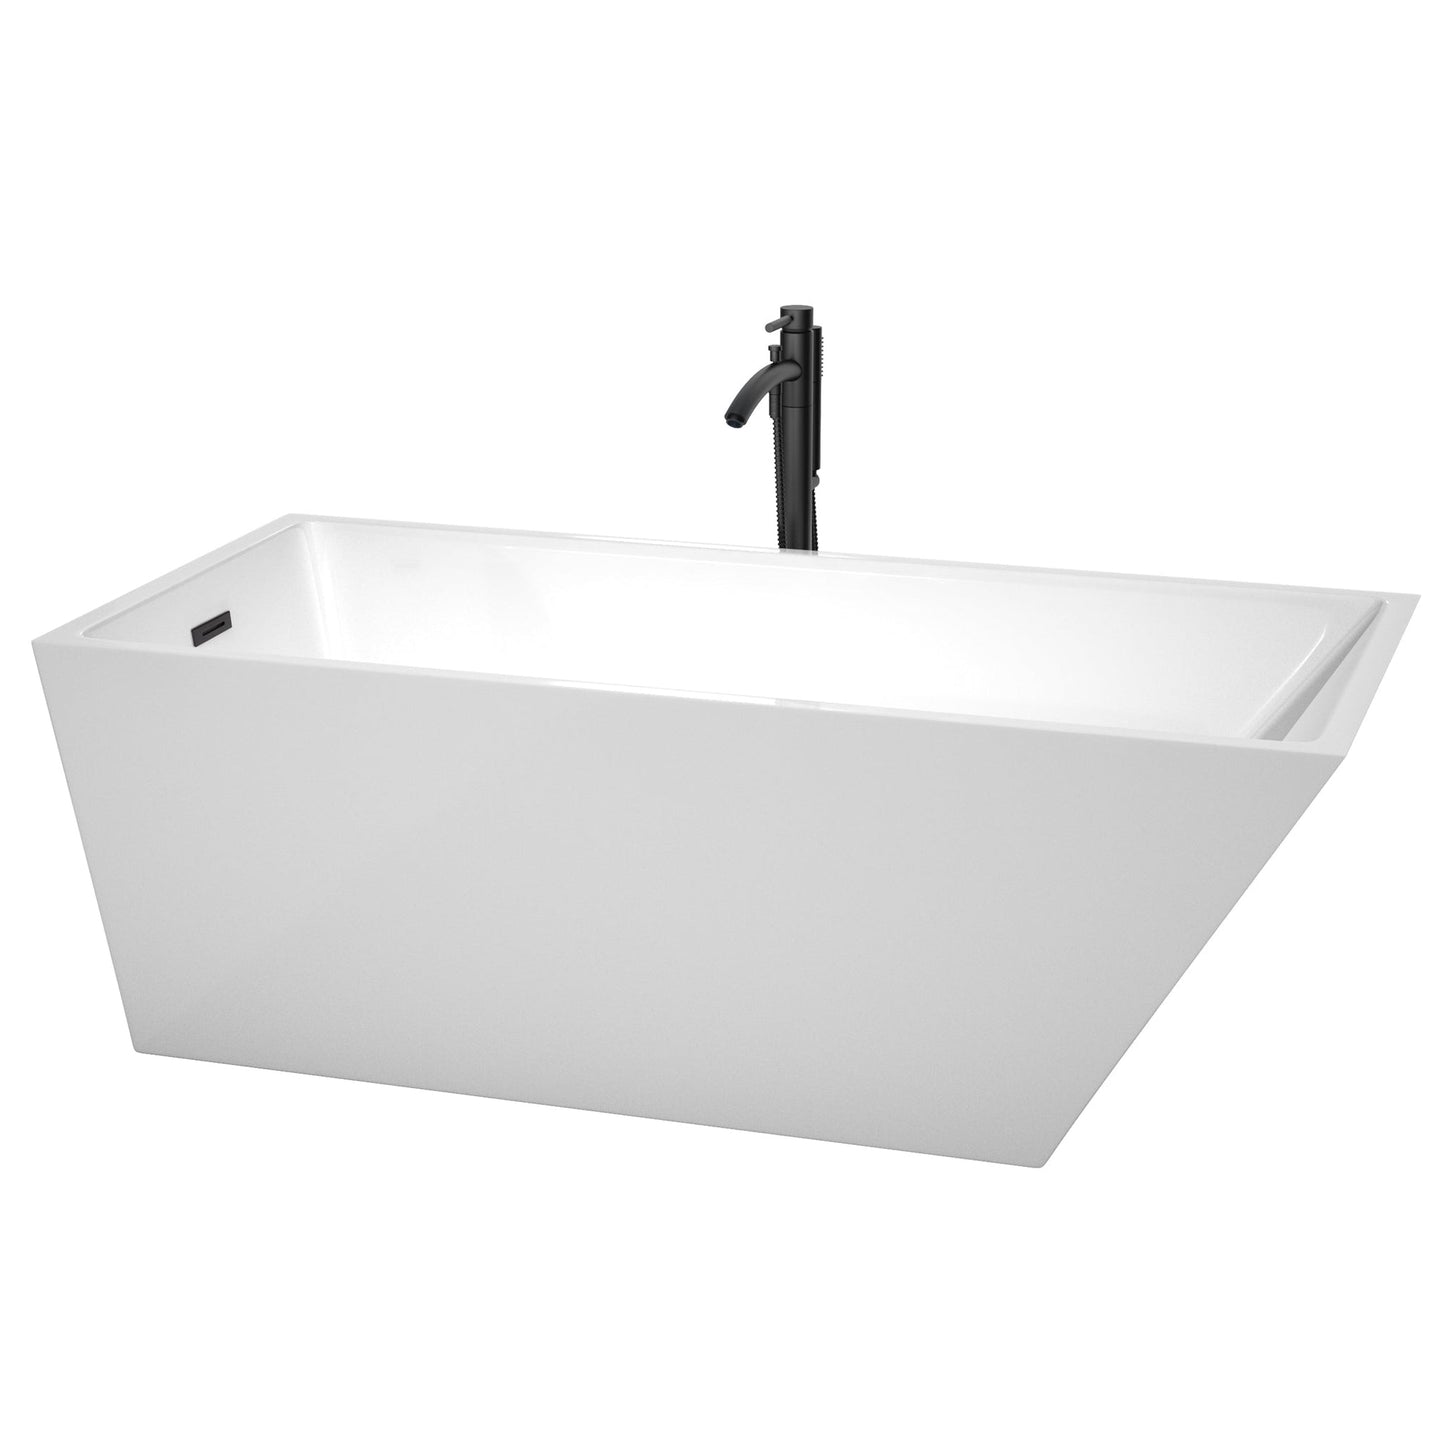 Wyndham Collection Hannah 67" Freestanding Bathtub in White With Floor Mounted Faucet, Drain and Overflow Trim in Matte Black